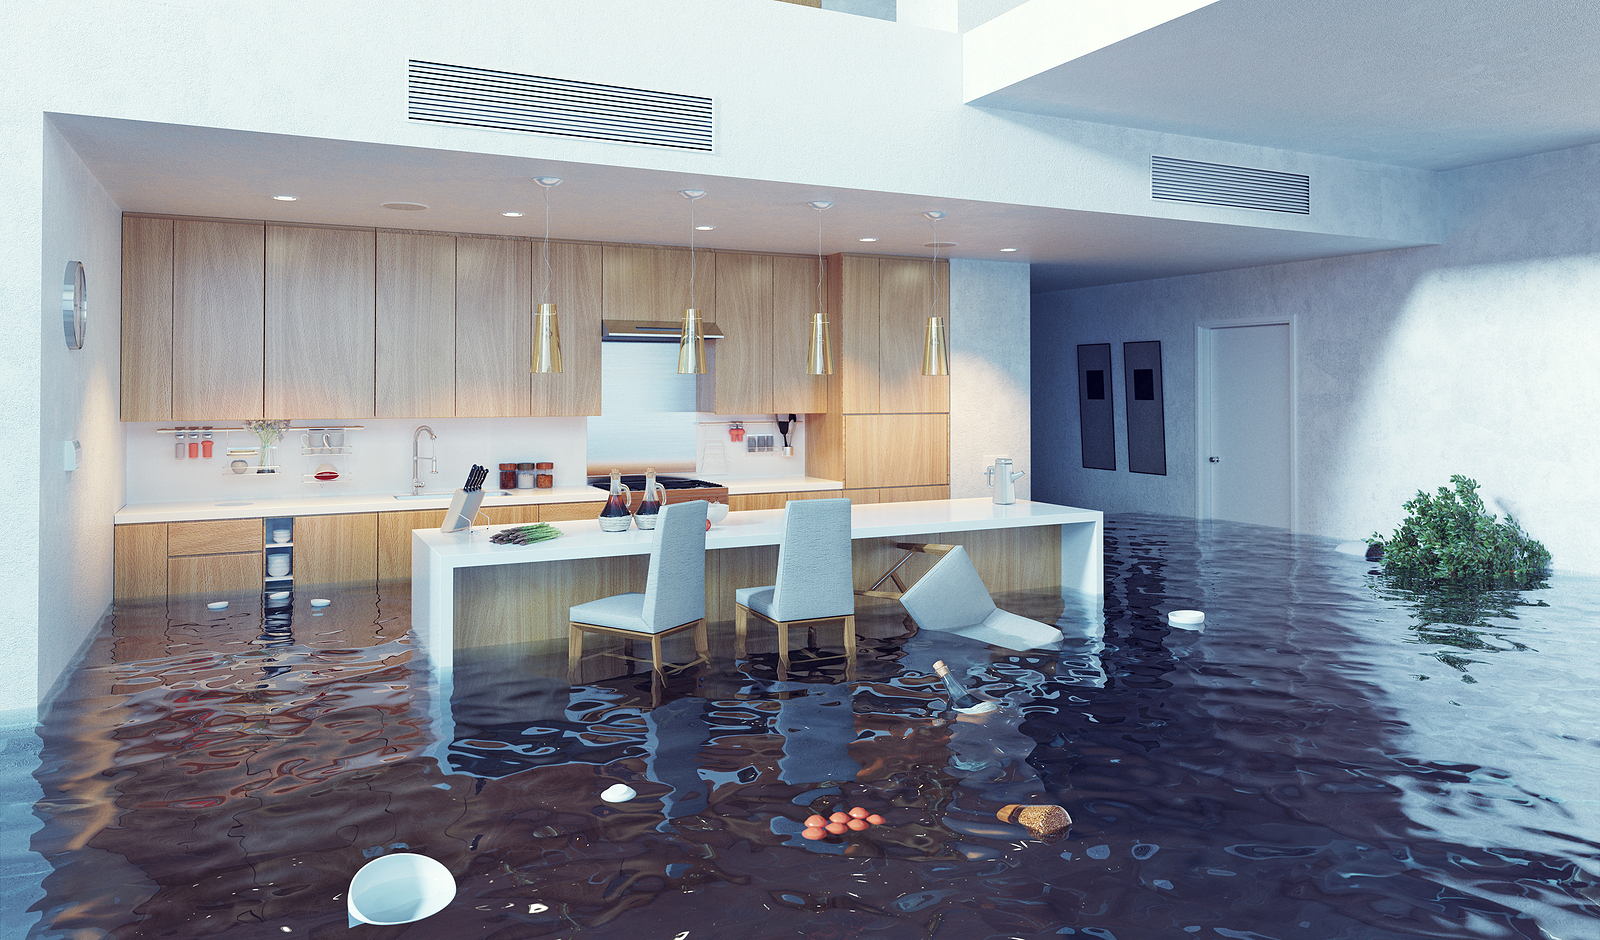 flood insurance vs water coverage differences